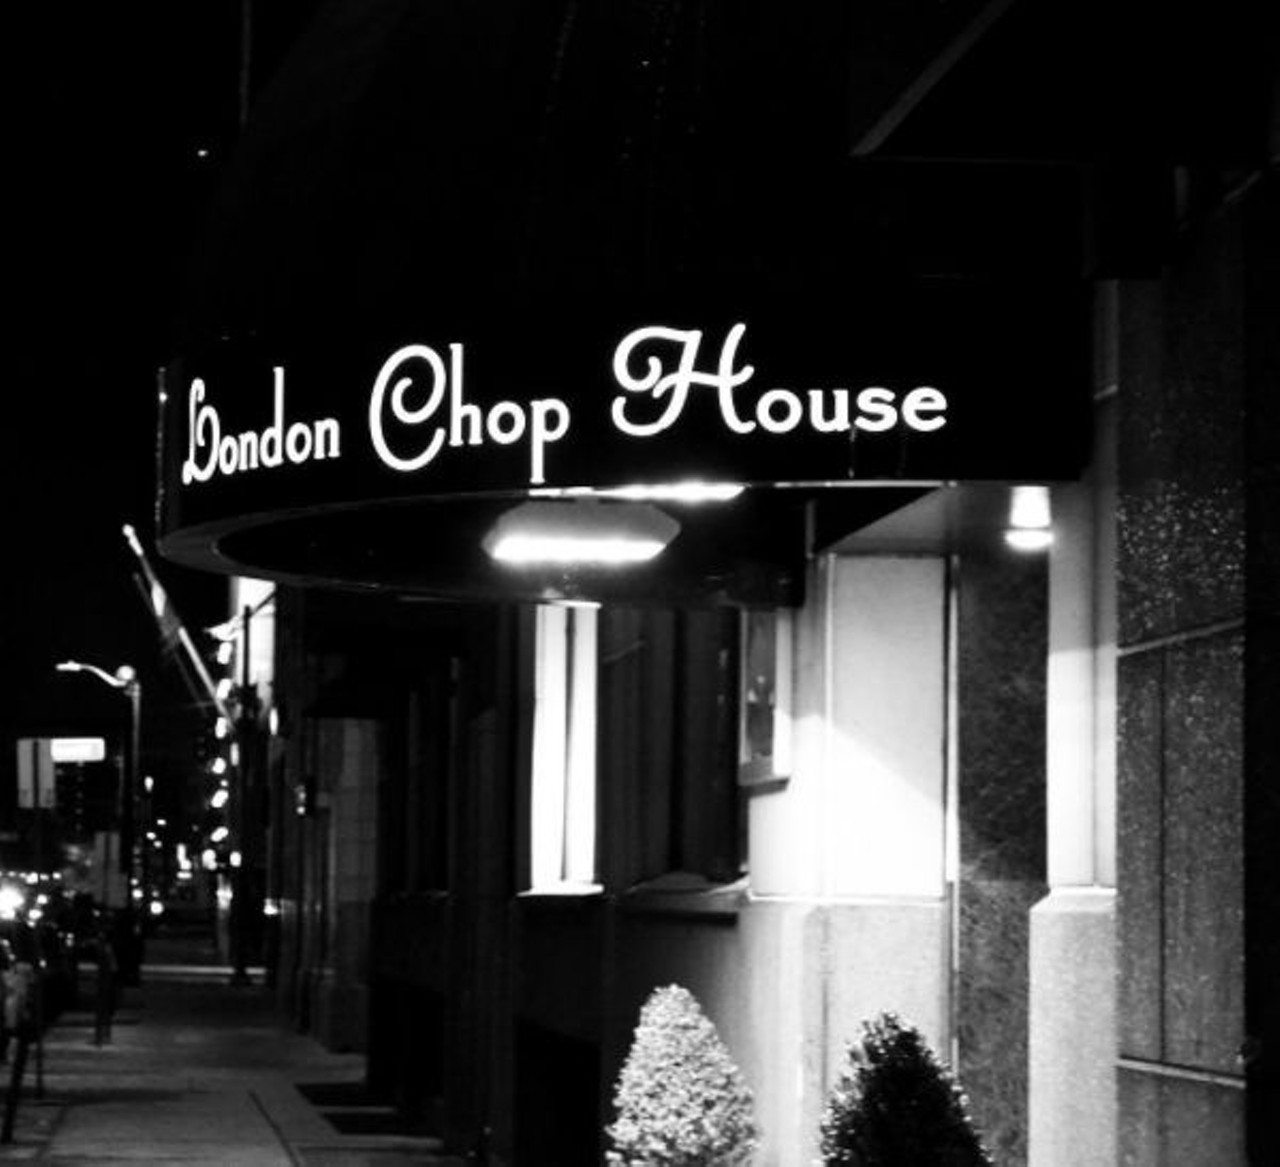 London Chop House
155 W Congress St, Detroit; 313-962-0277
This restaurant&#146;s mission has been to provide a fine dining experience to its customers since 1938. After returning to the basement of the Murphy-Telegraph building, London Chop House shows itself as a major throwback to an era of rich design with their oak bar and polished red leather banquettes. This place is a bit pricey, but it&#146;s worth it; so on your next date night take bae here, and have their crab bisque, lamb chops with ratatouille, or the bone in rib-eye steak and show just how classy you are.
Photo via IG user @jasperhousini